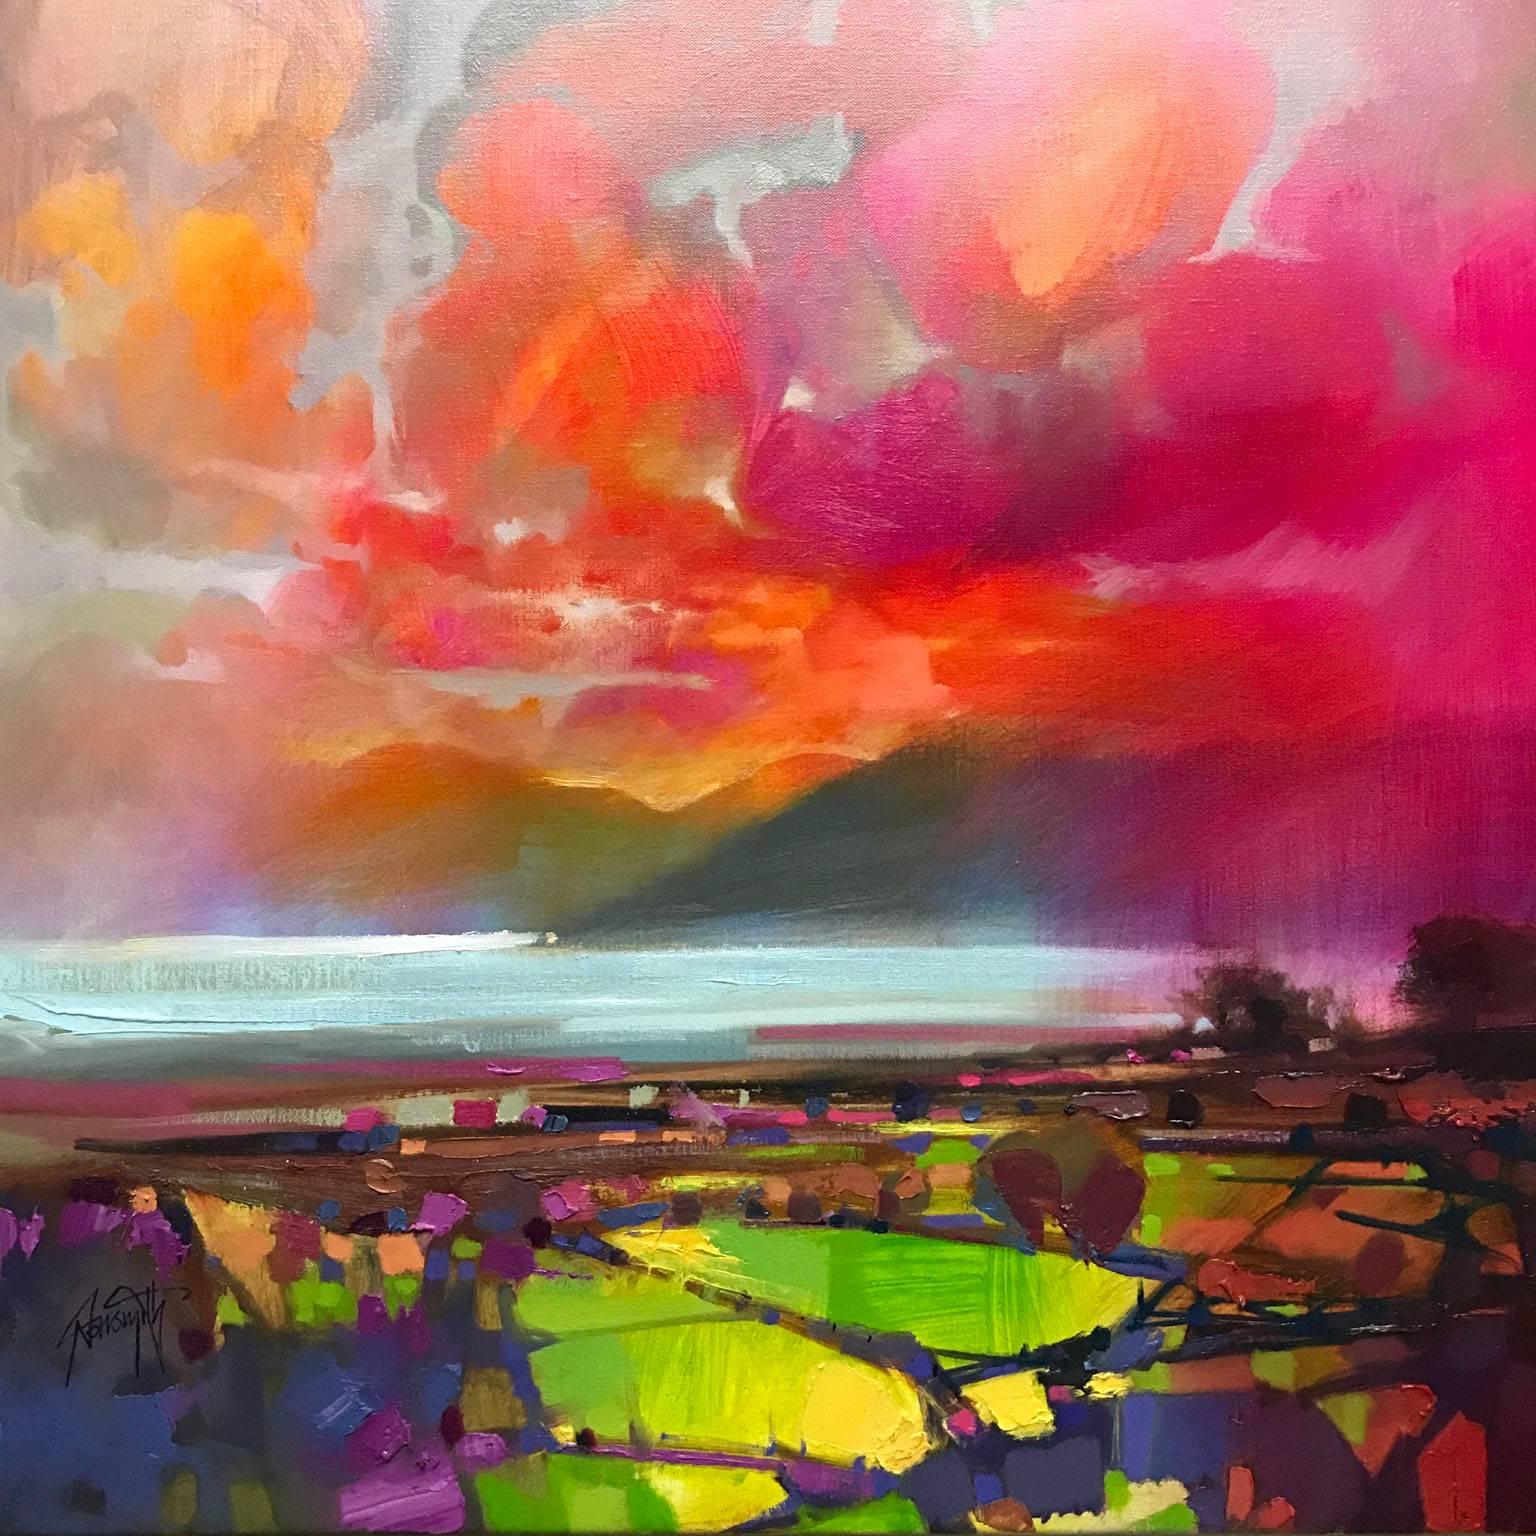 Scott Naismith Landscape Painting - Red Skies, colourful abstract contemporary painting, original landscape painting